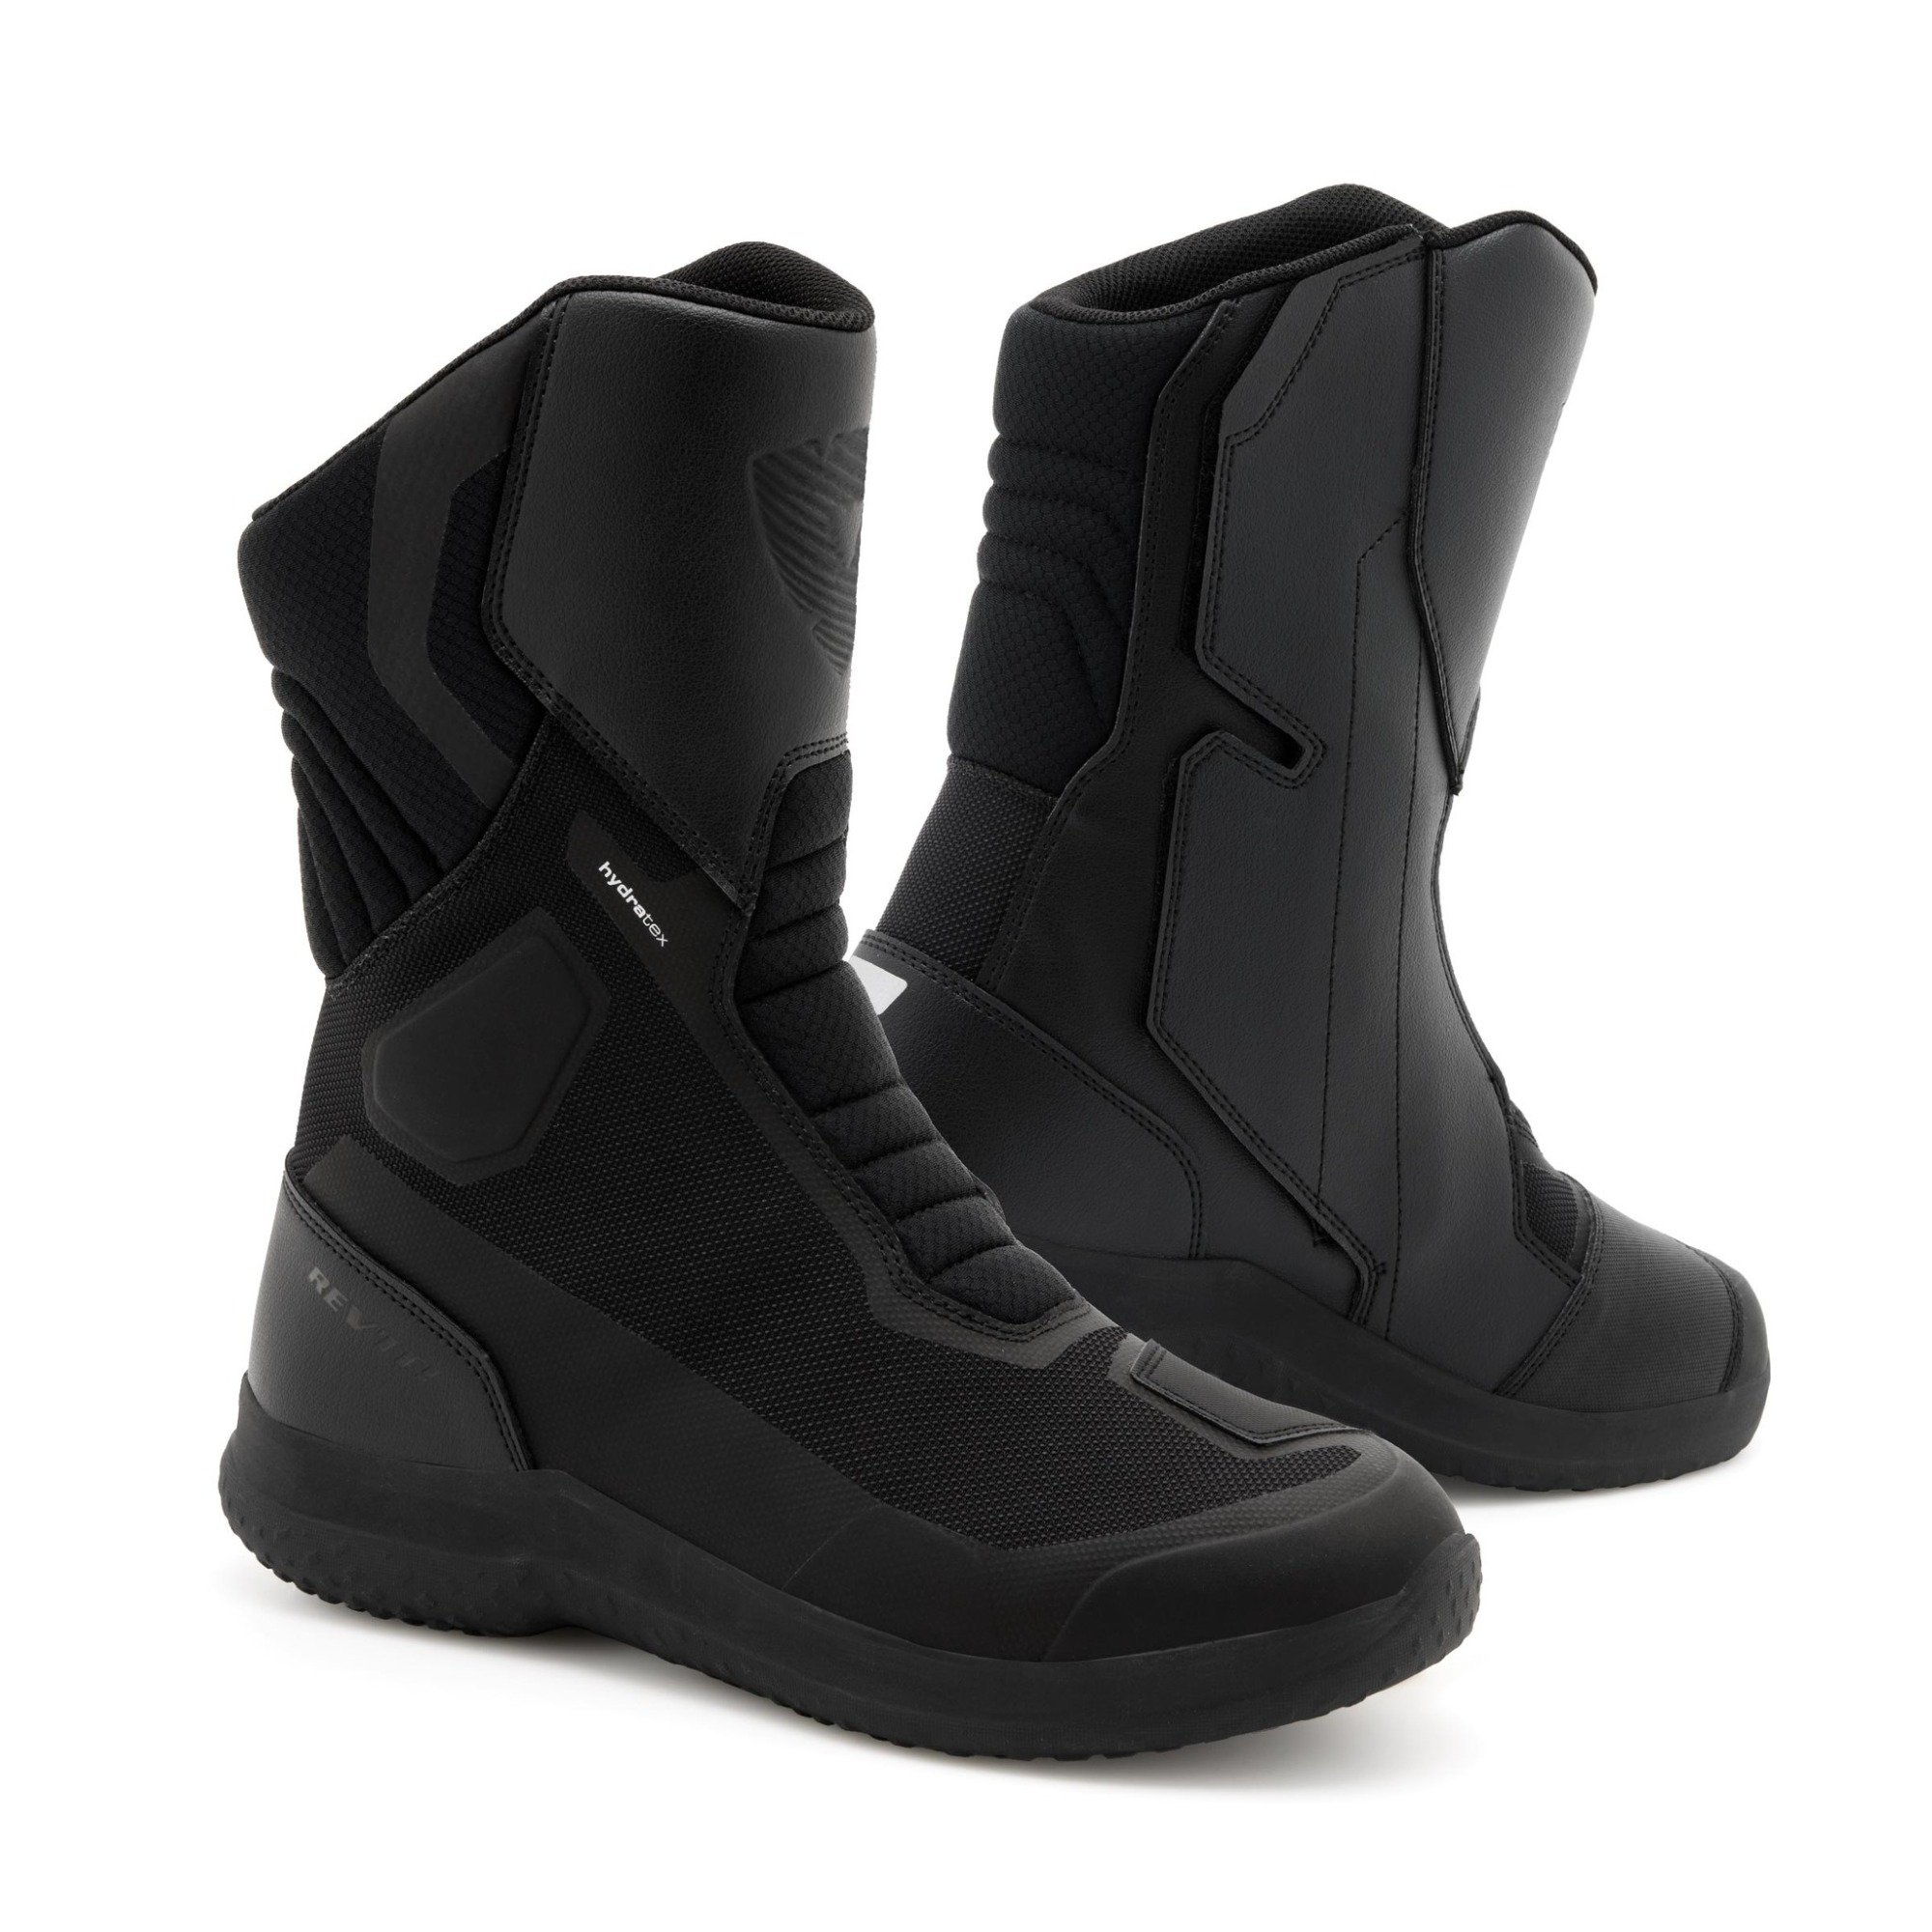 Image of REV'IT! Boots Pulse H2O Black Size 38 ID 8700001343985